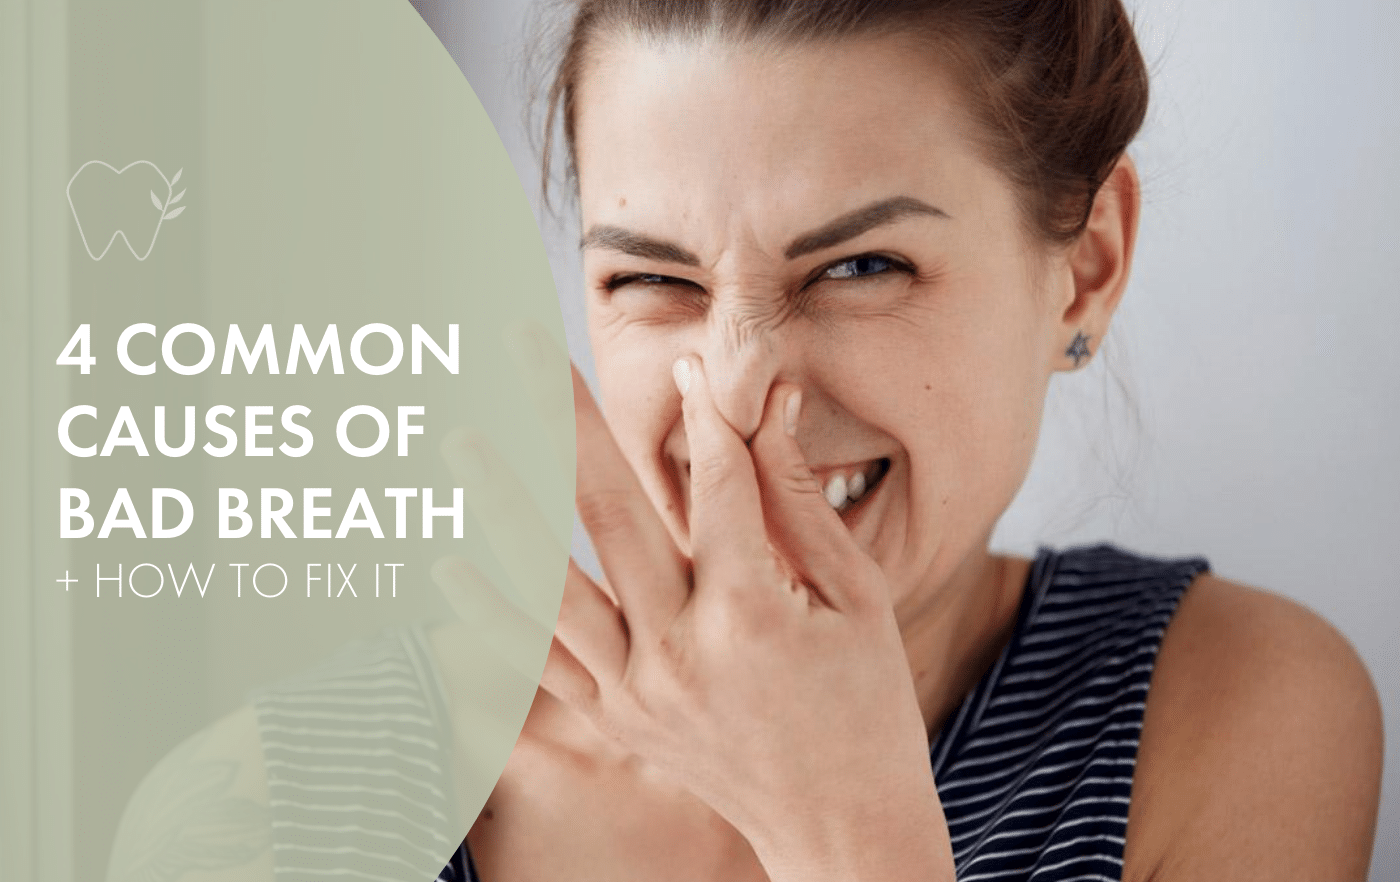 4 Common Causes of Bad Breath and how to fix it